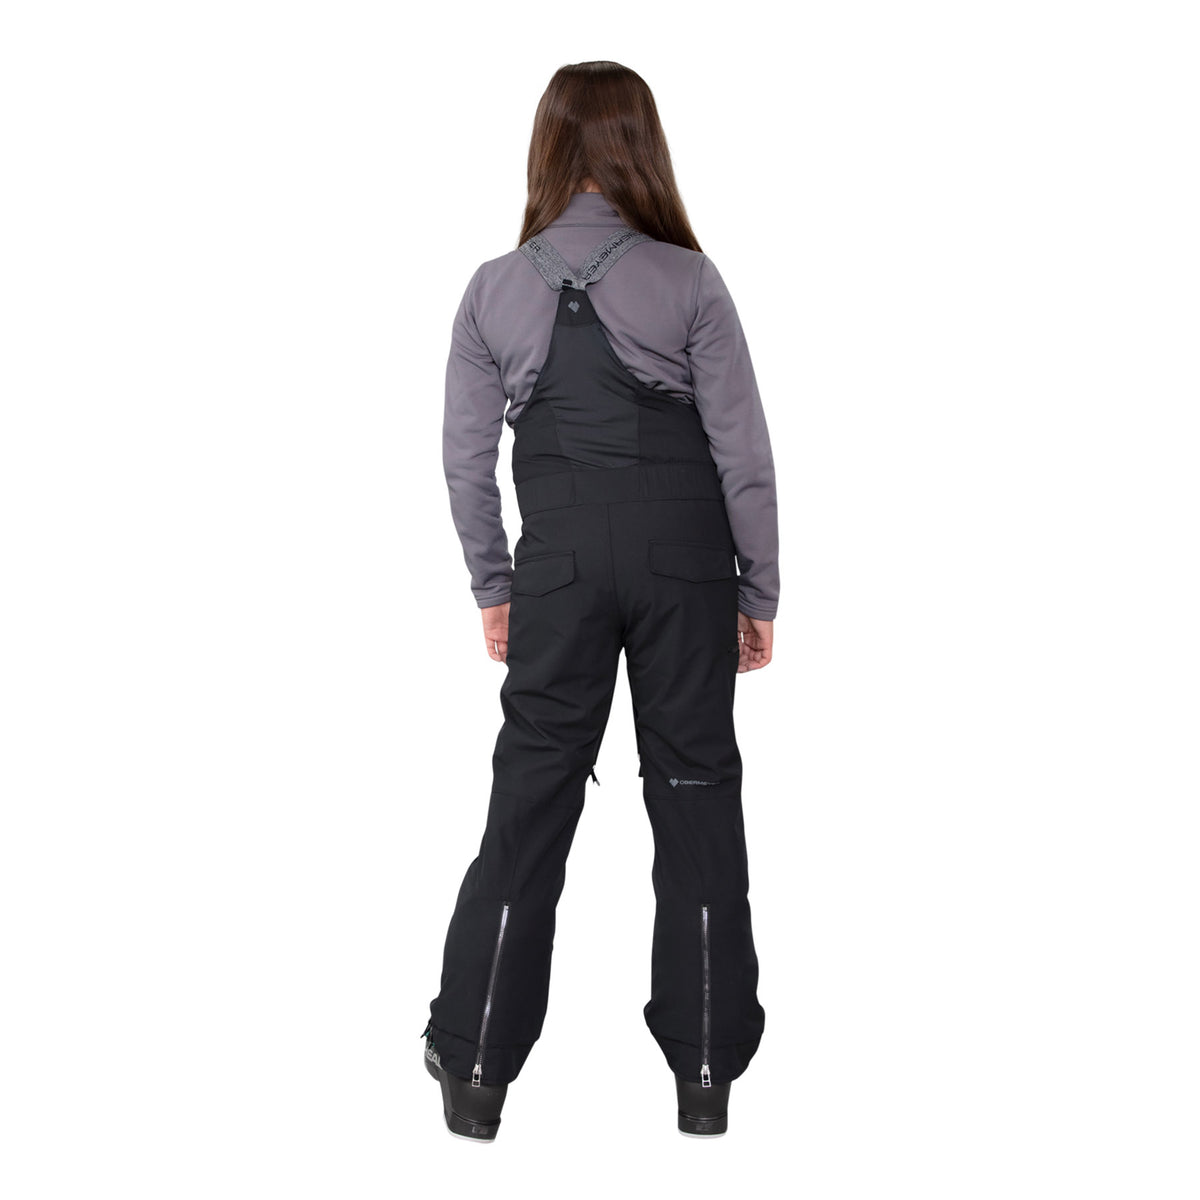 Image features the back of a model wearing the Obermeyer girls Anya Bib Pant in black with black ski boots and a grey long sleeve.